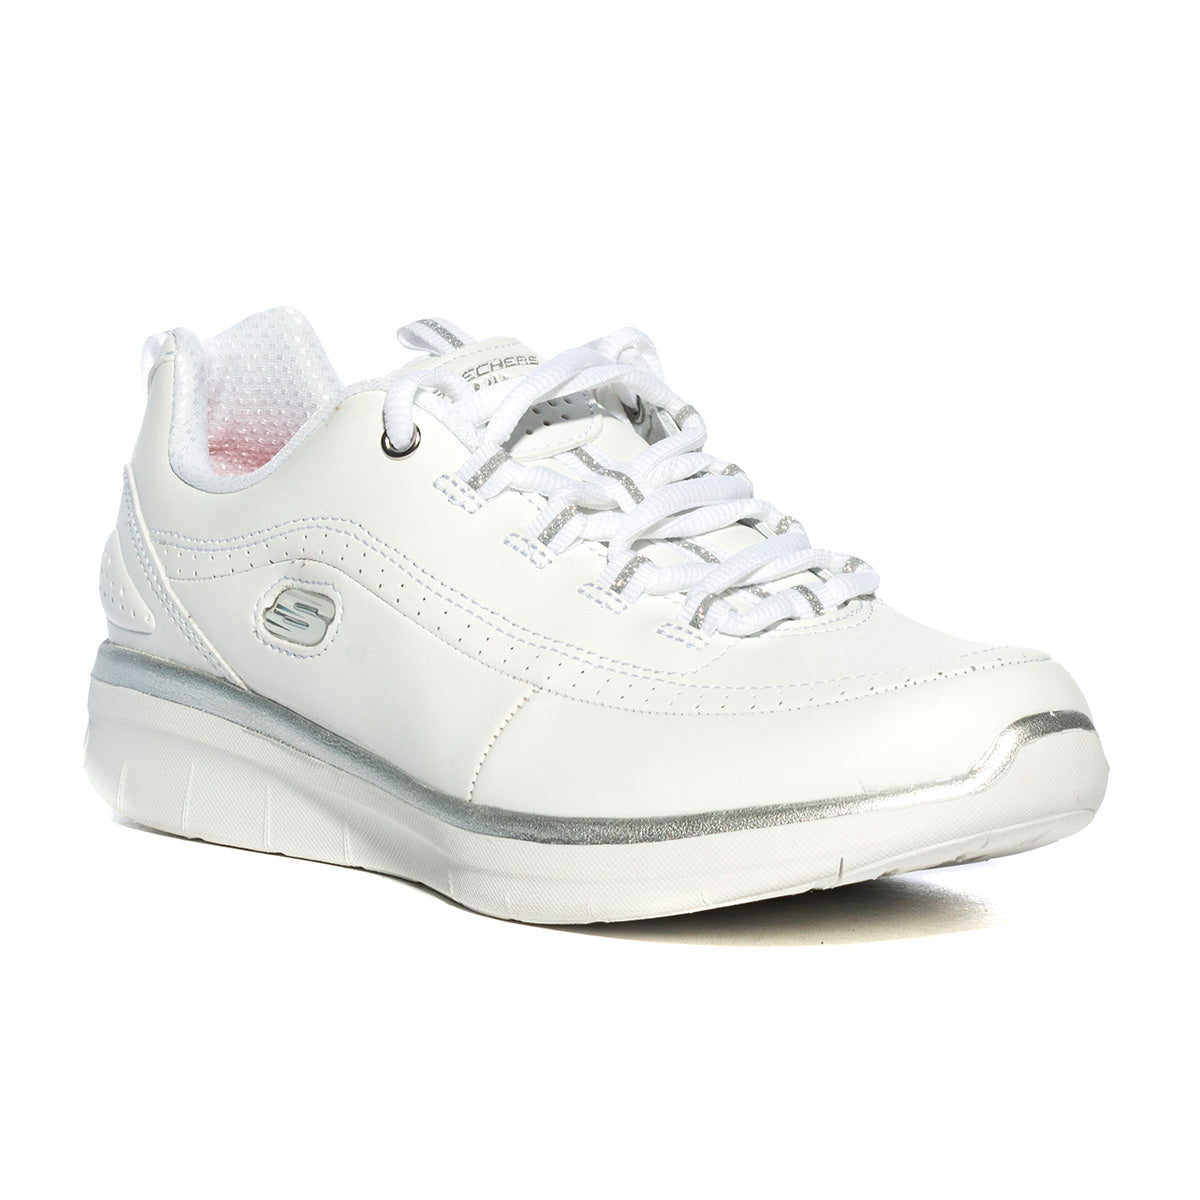 Sneakers Skechers Synergy 2.0 bianche